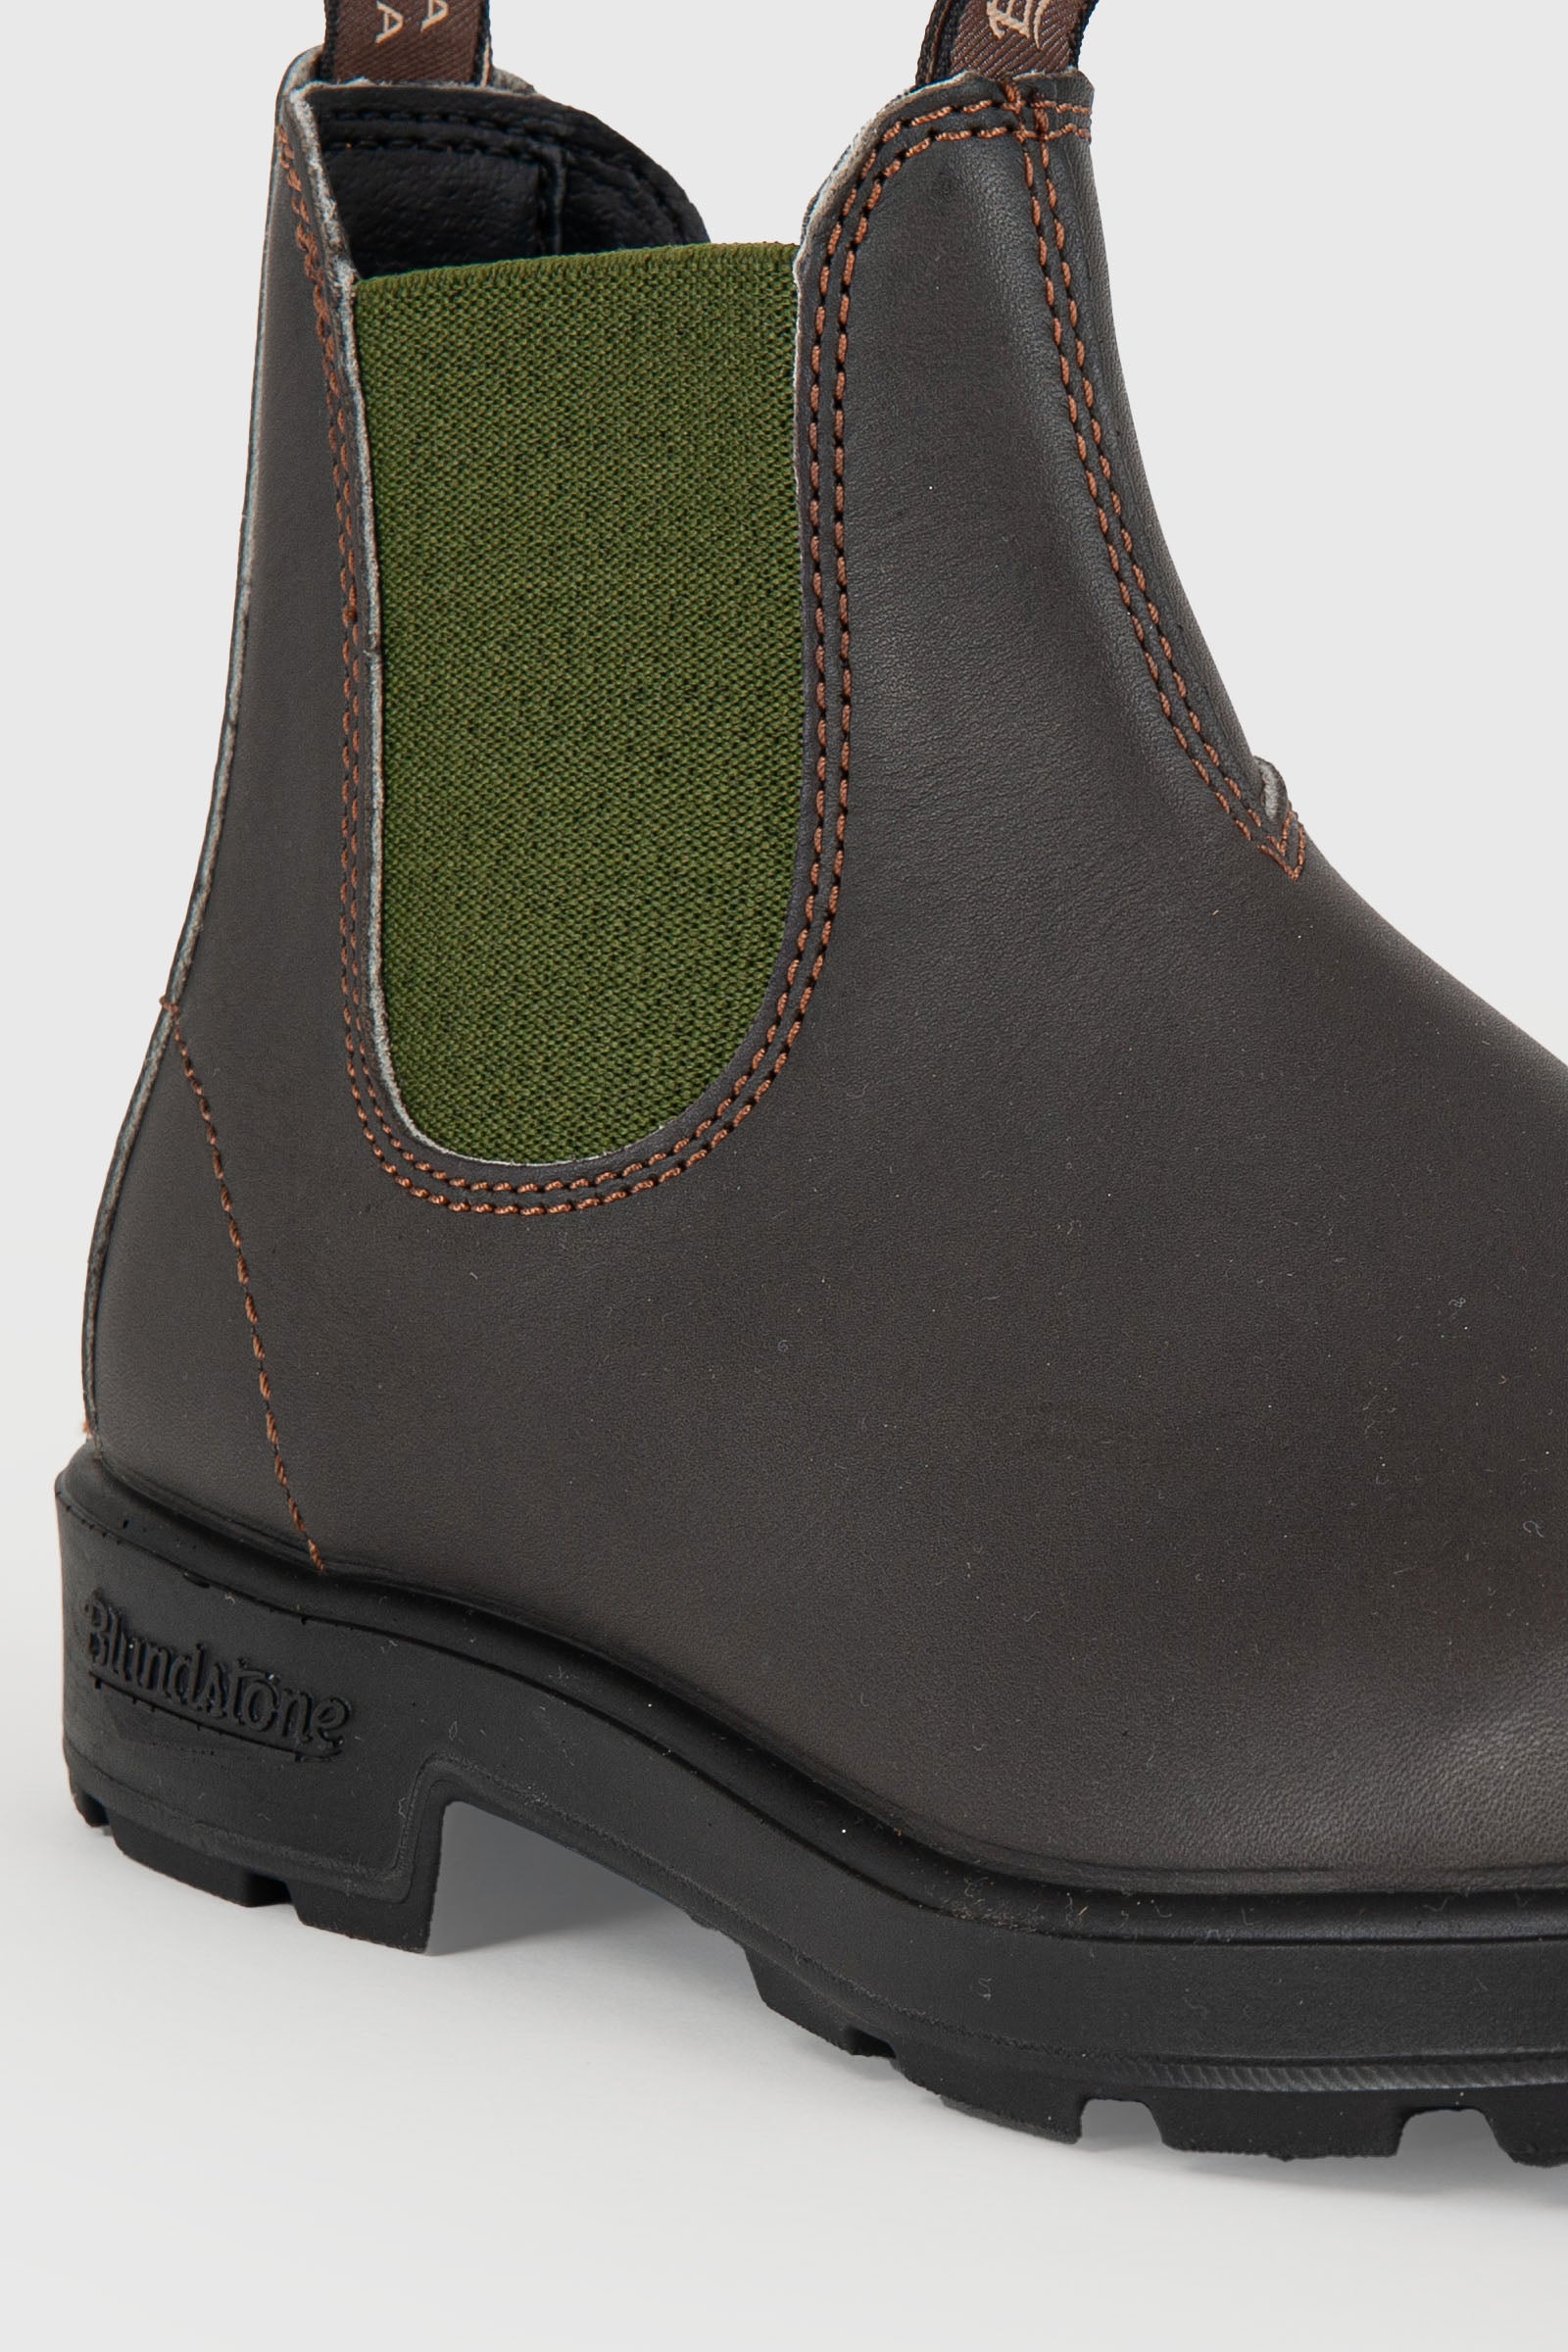 Blundstone Stivaletto Beatle 519 Pelle Stout Brown/Olive - 5